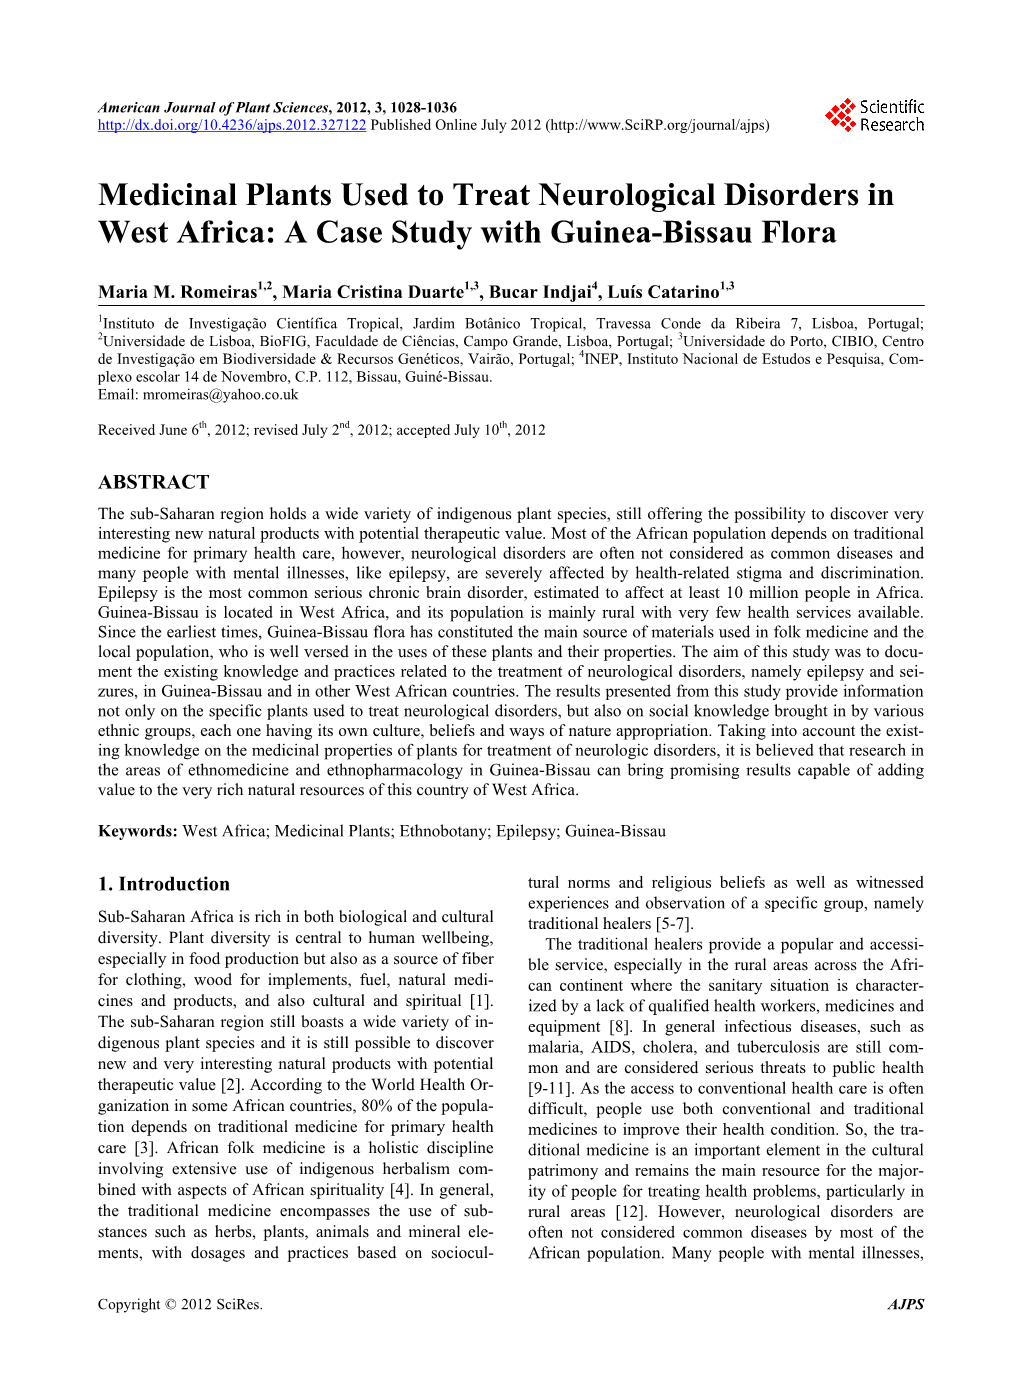 Medicinal Plants Used to Treat Neurological Disorders in West Africa: a Case Study with Guinea-Bissau Flora